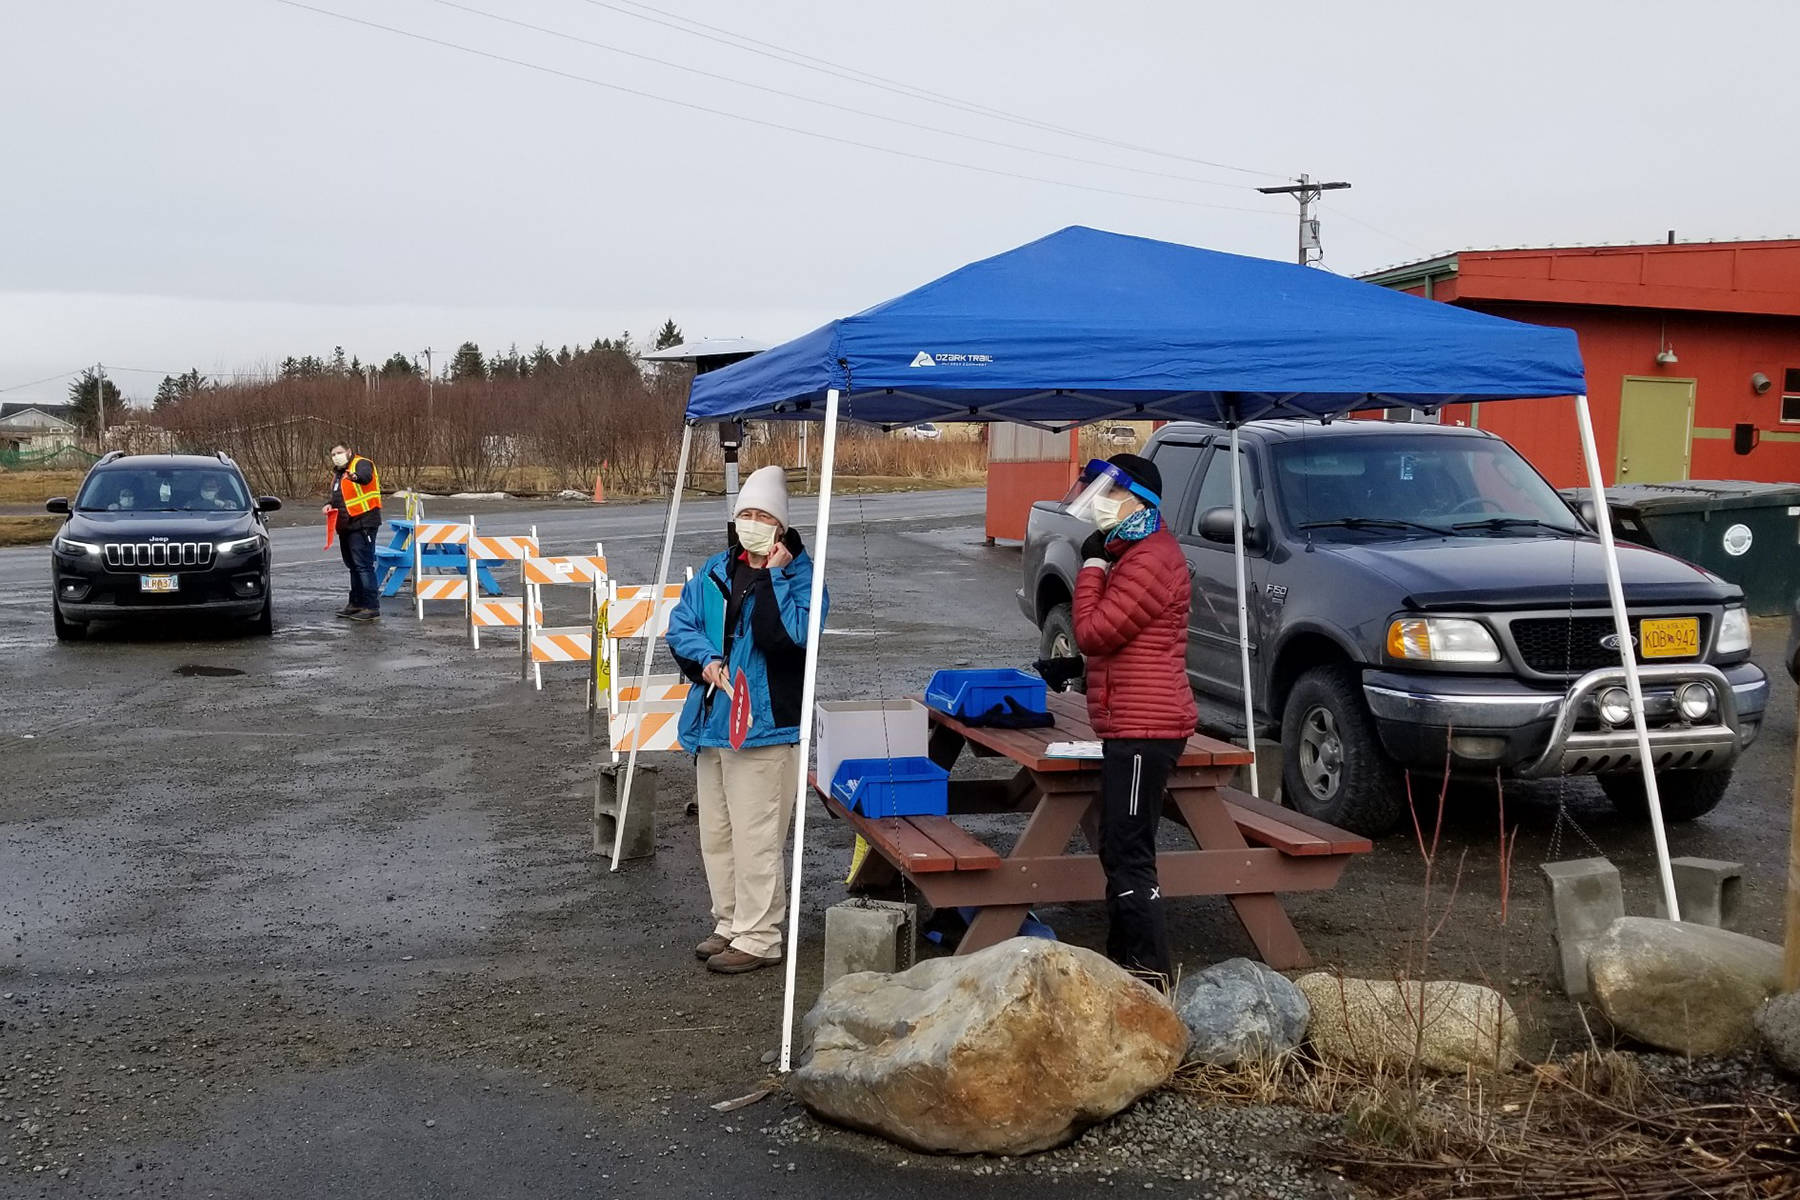 South Peninsula Hospital staff practice using the alternate COVID-19 testing site being set up at the Homer Chamber of Commerce and Visitor Center in Homer, Alaska. The site will only be opened if increased referrals for testing necessitates it. (Photo courtesy Derotha Ferraro)